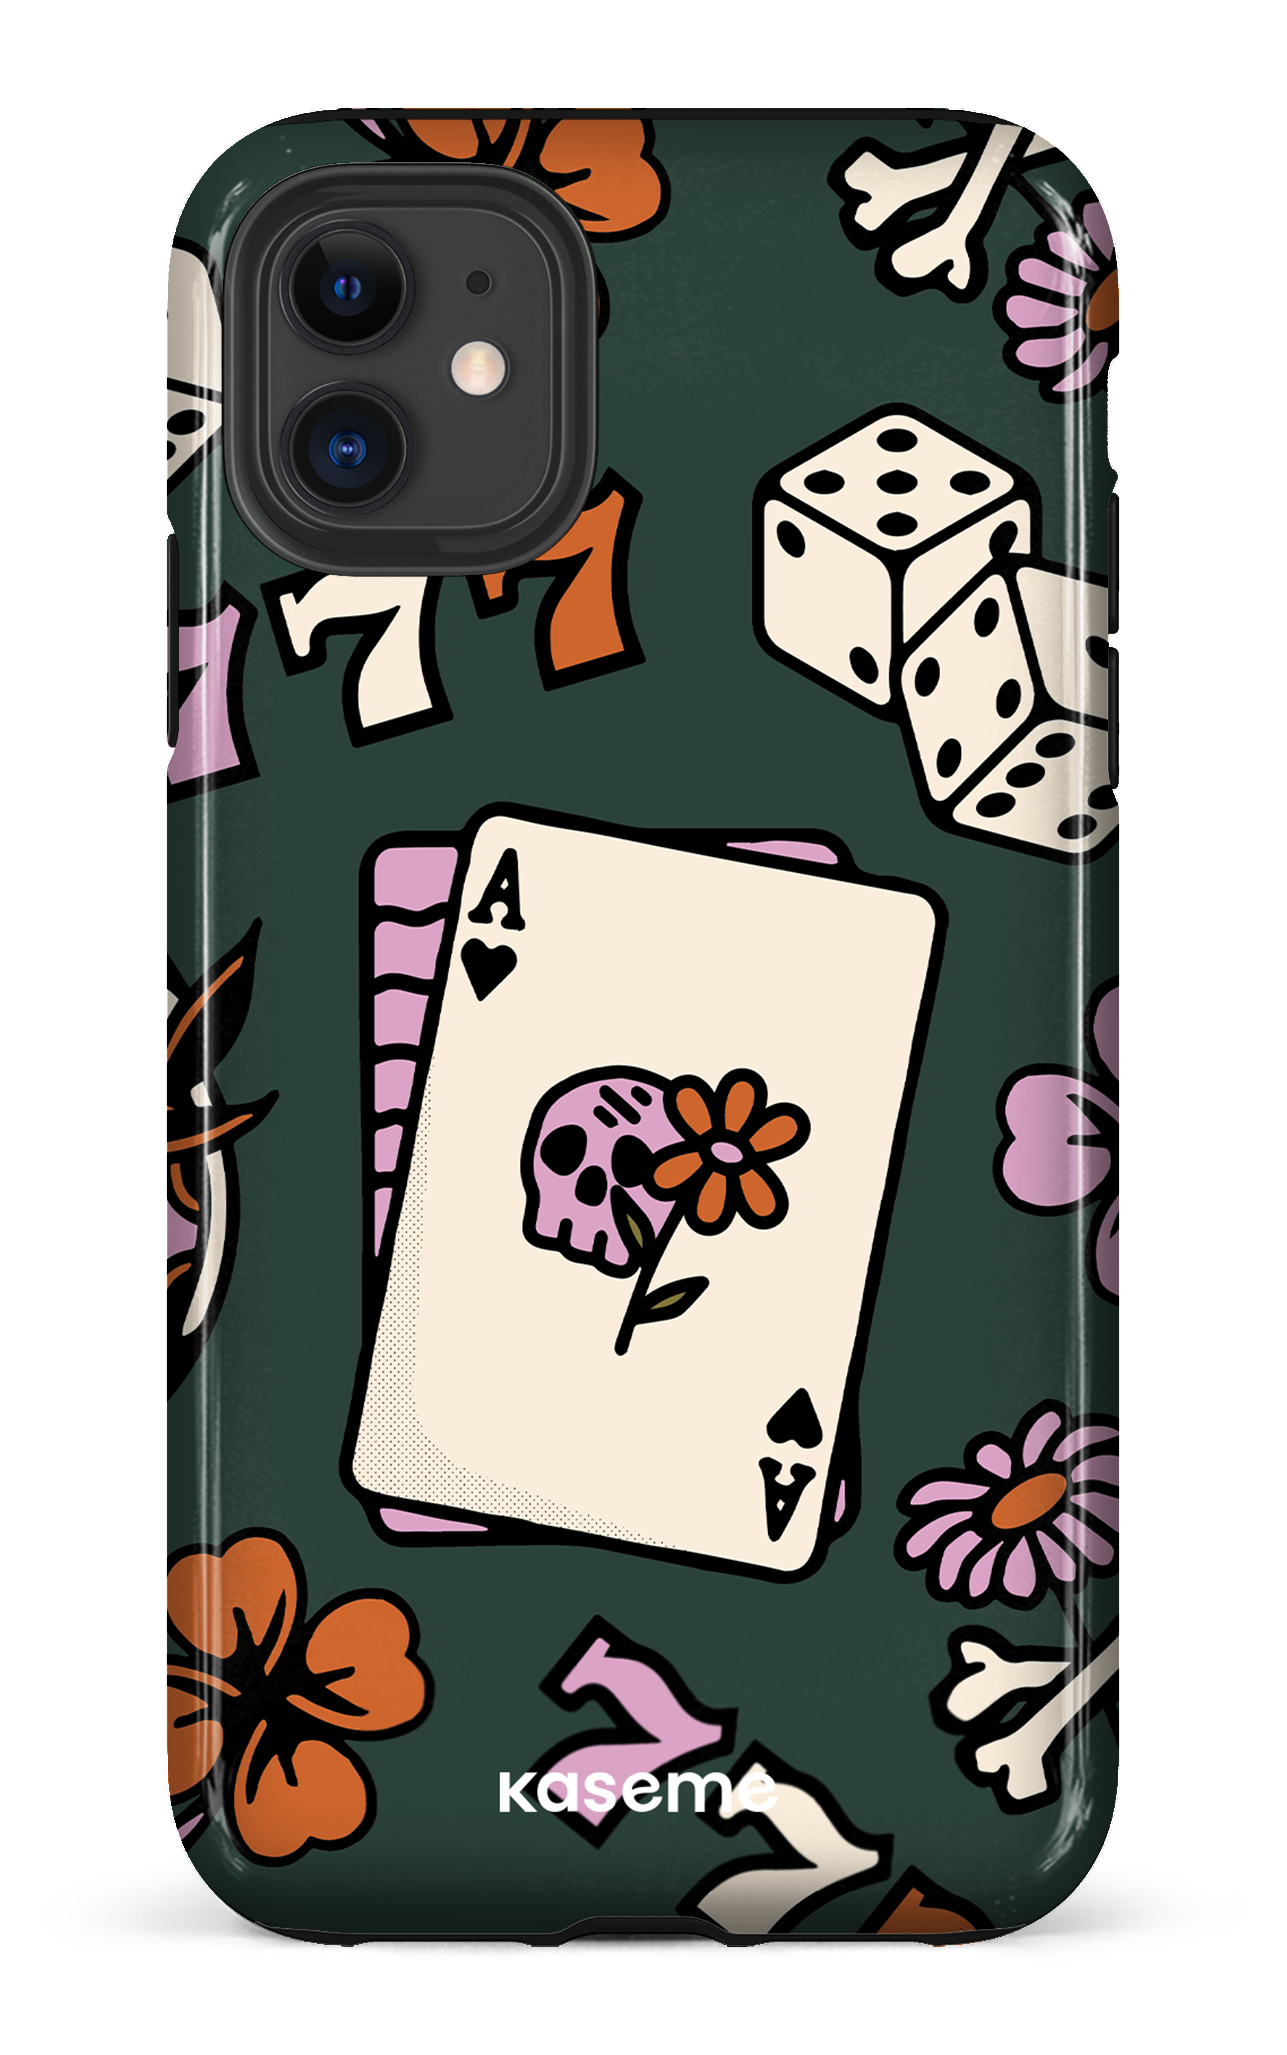 Poker Face - iPhone 11